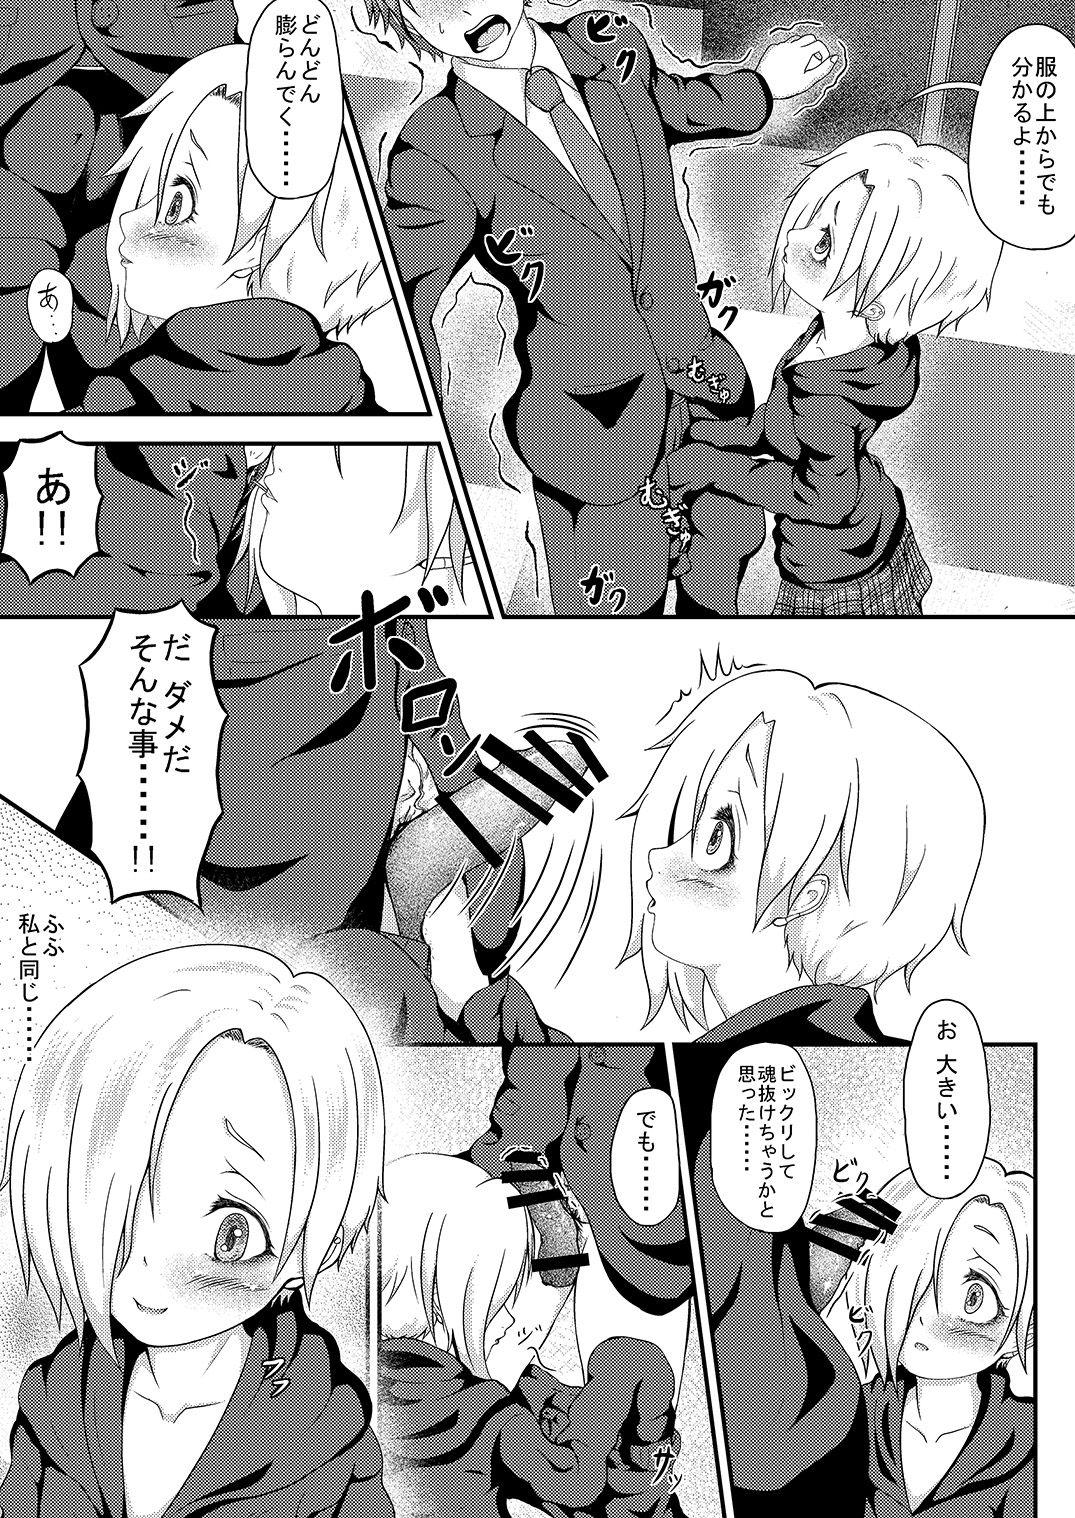 Webcam The H-aunting of Koume-chan - The idolmaster Punished - Page 7